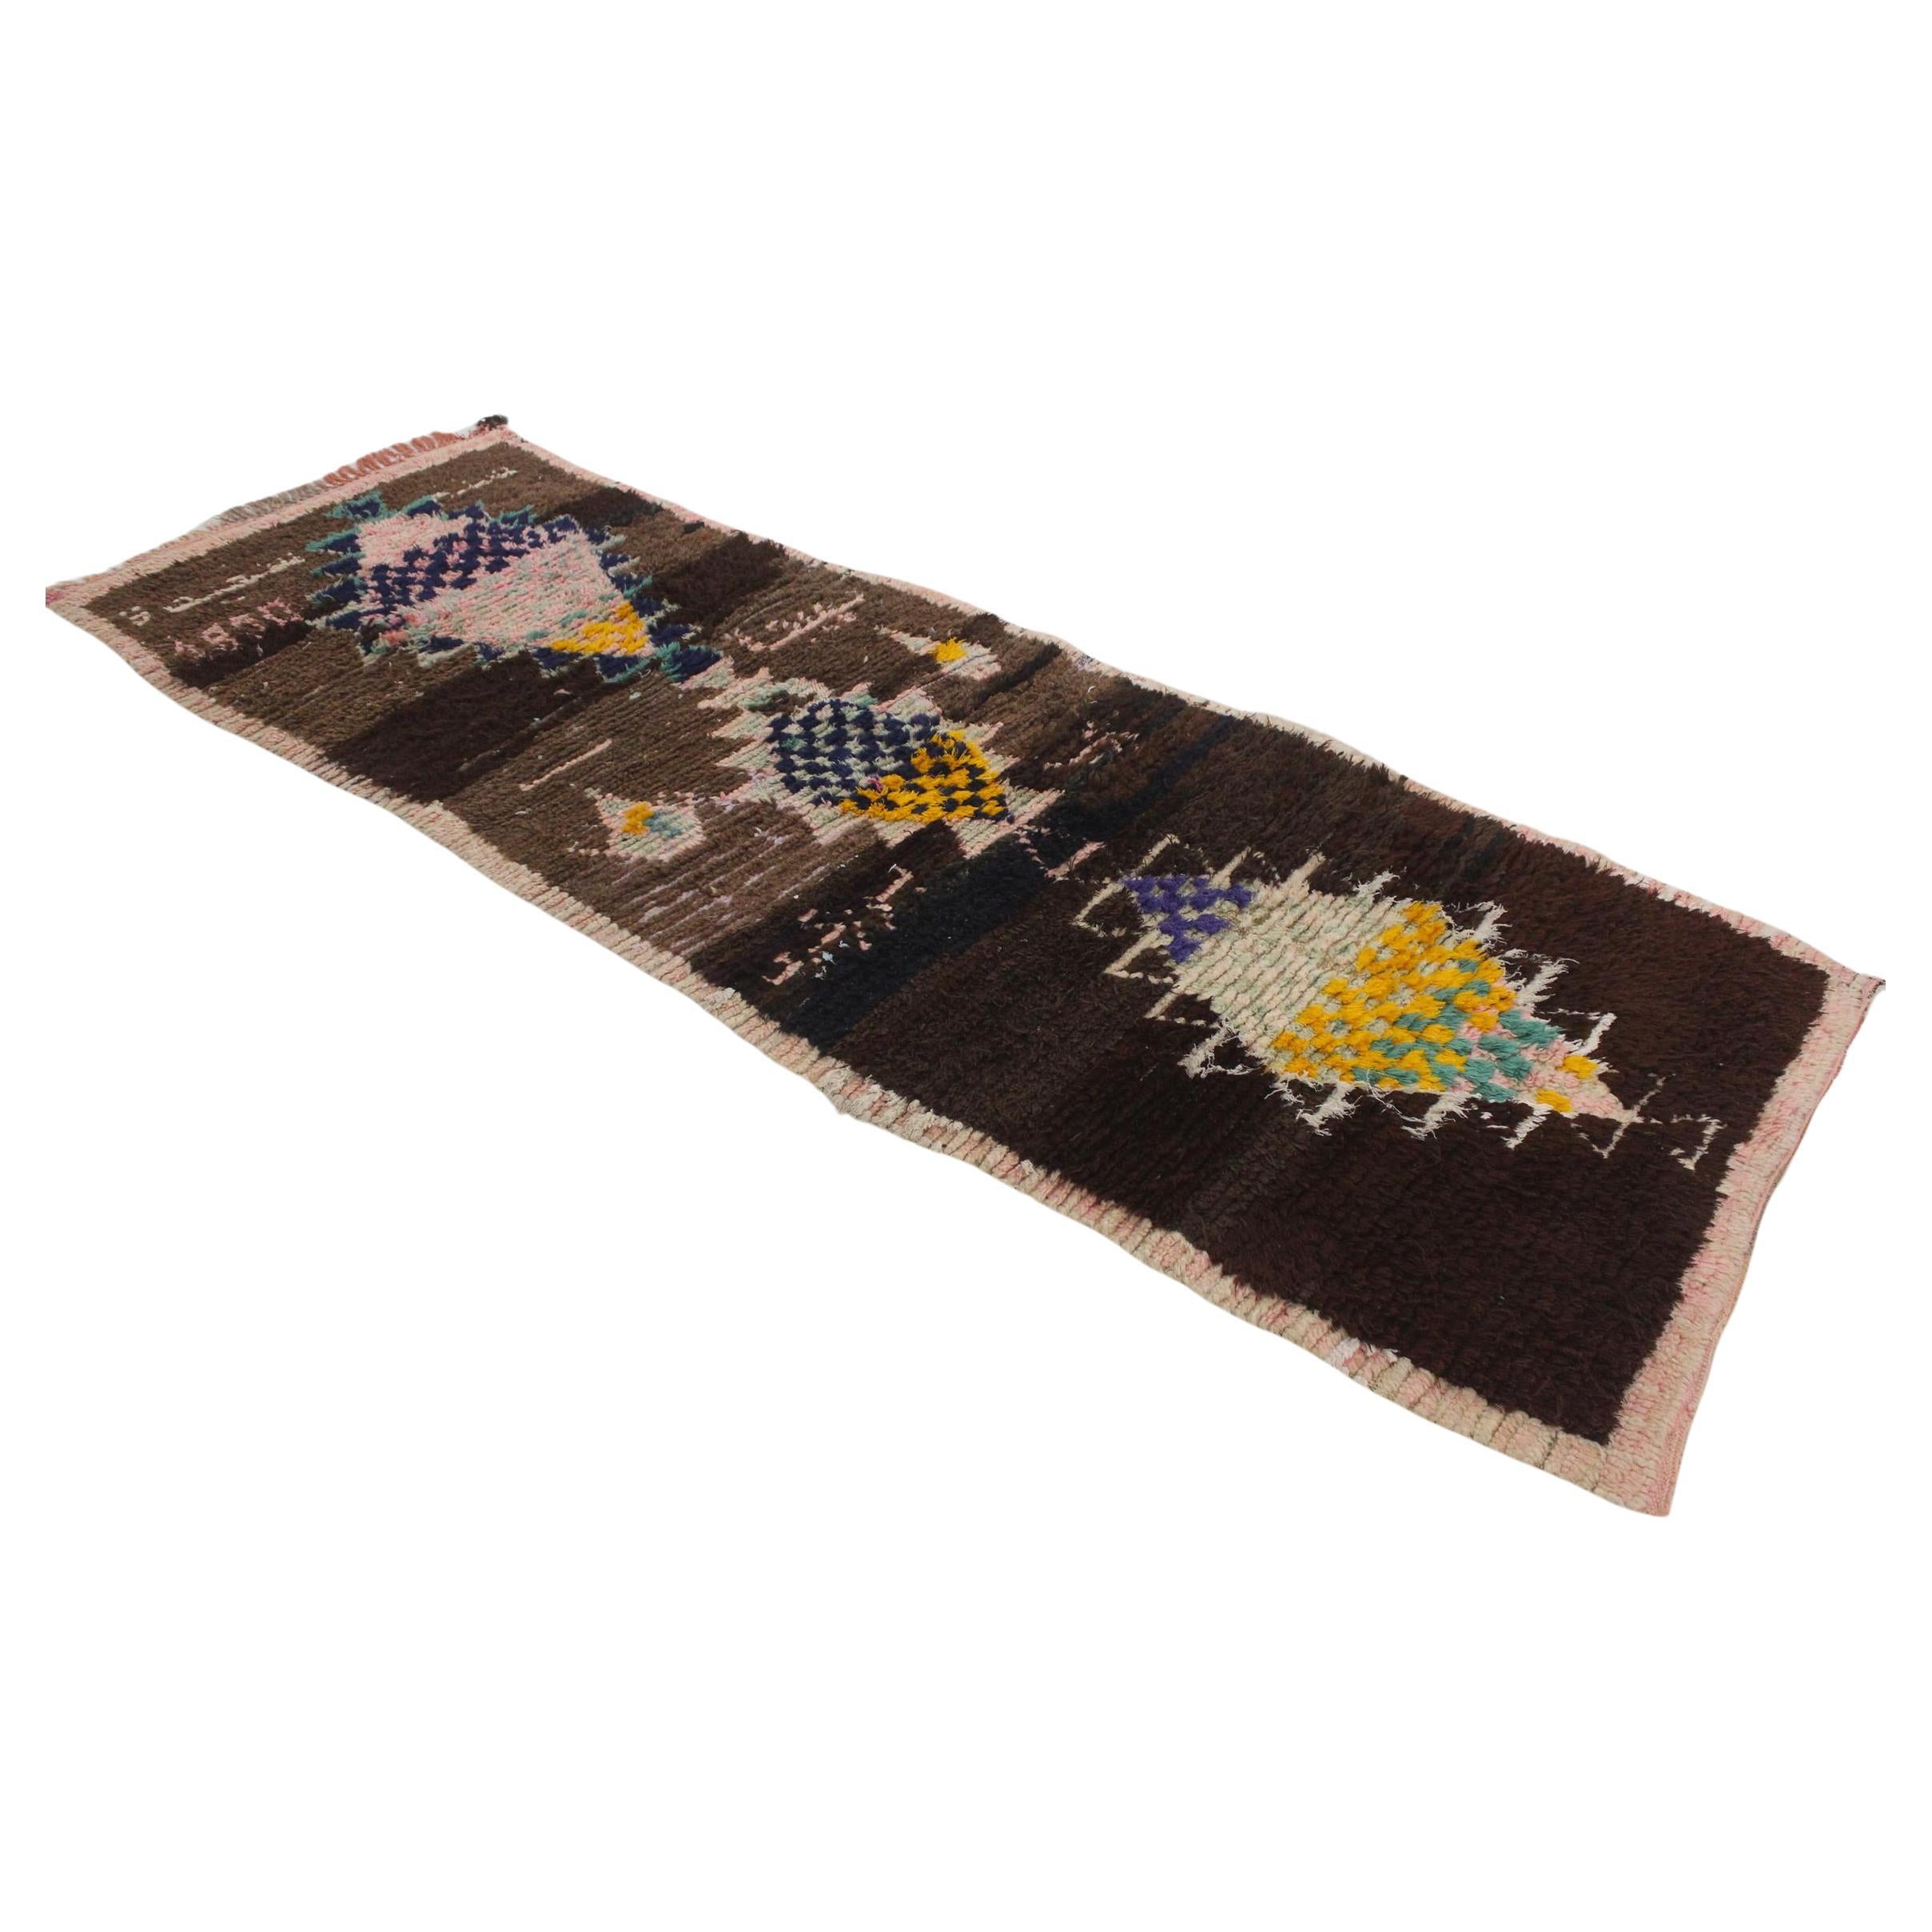 1990 vintage Moroccan Azilal runner rug - Brown/pink - 3x8.7feet / 93x265cm For Sale